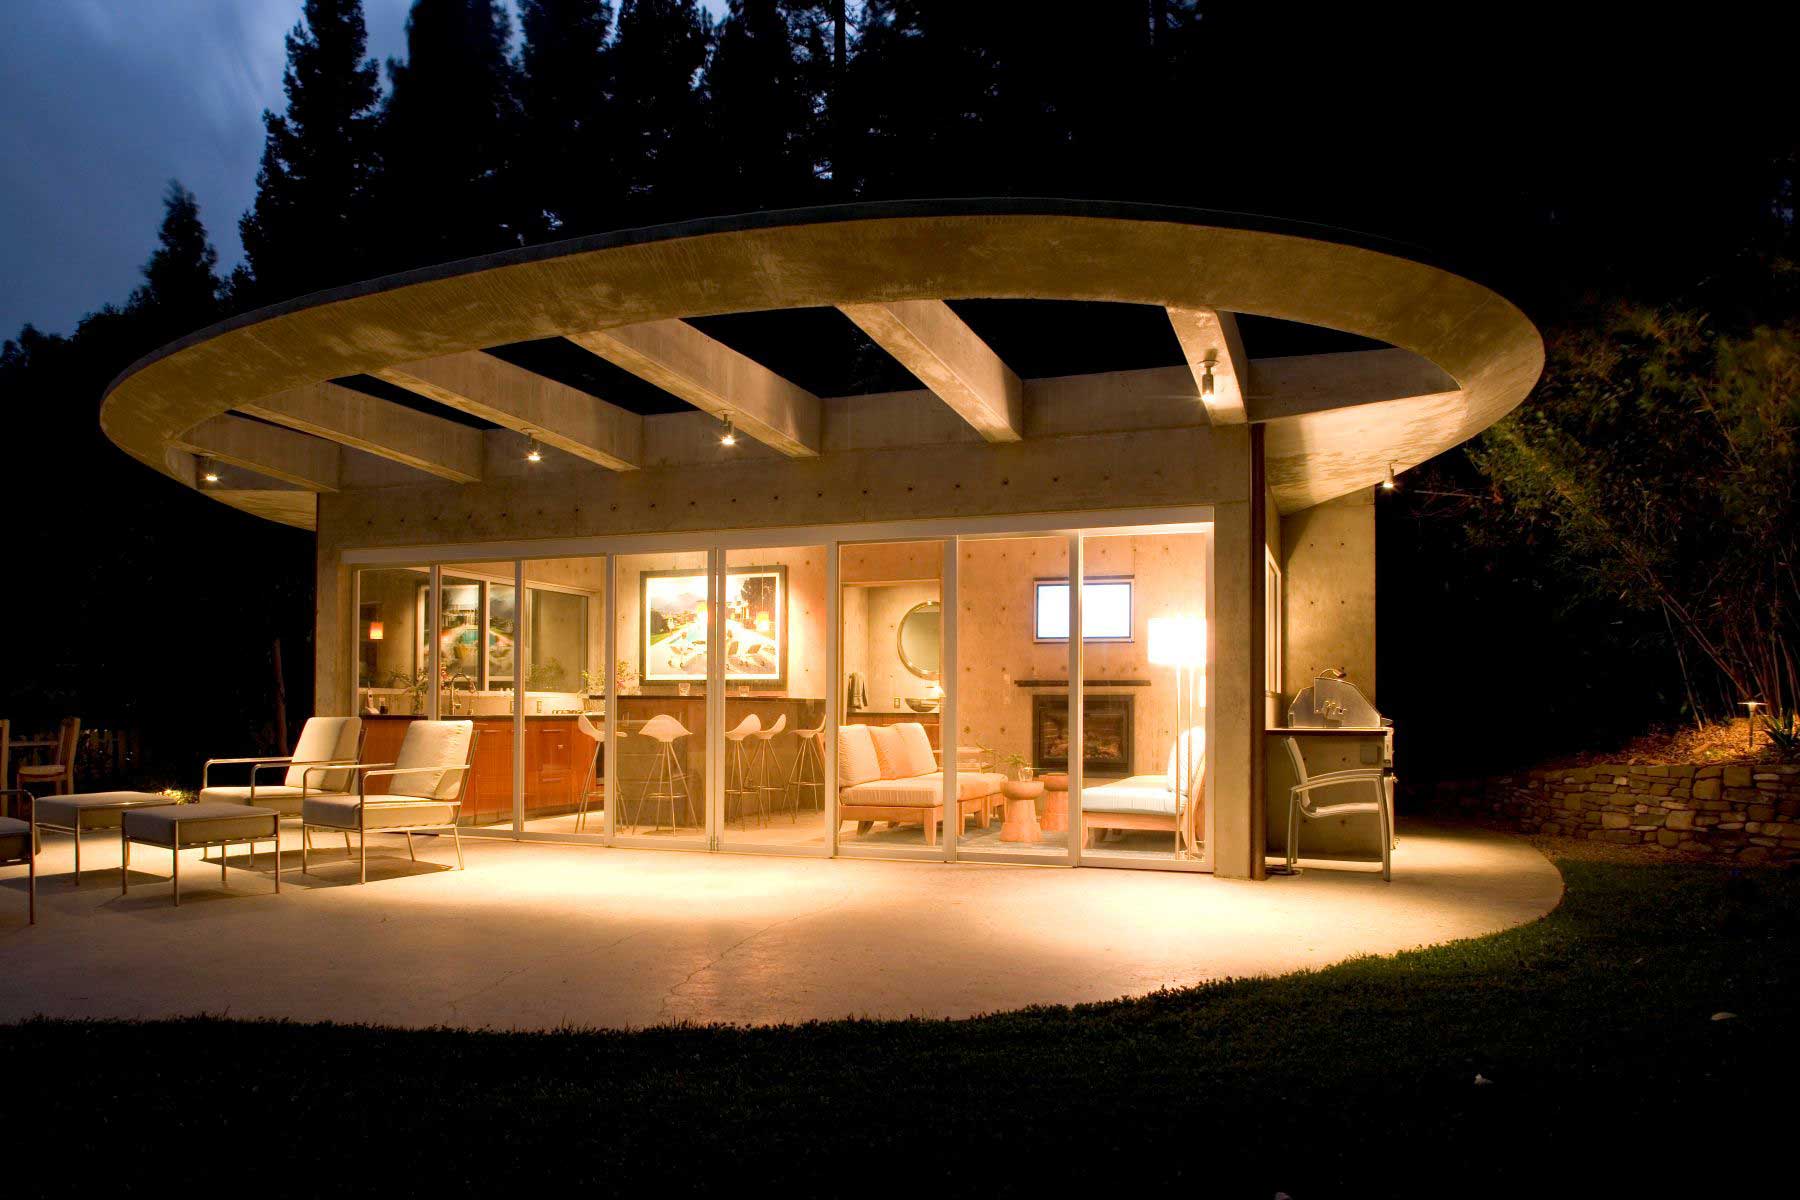 Clarke Residence pool house exterior night time